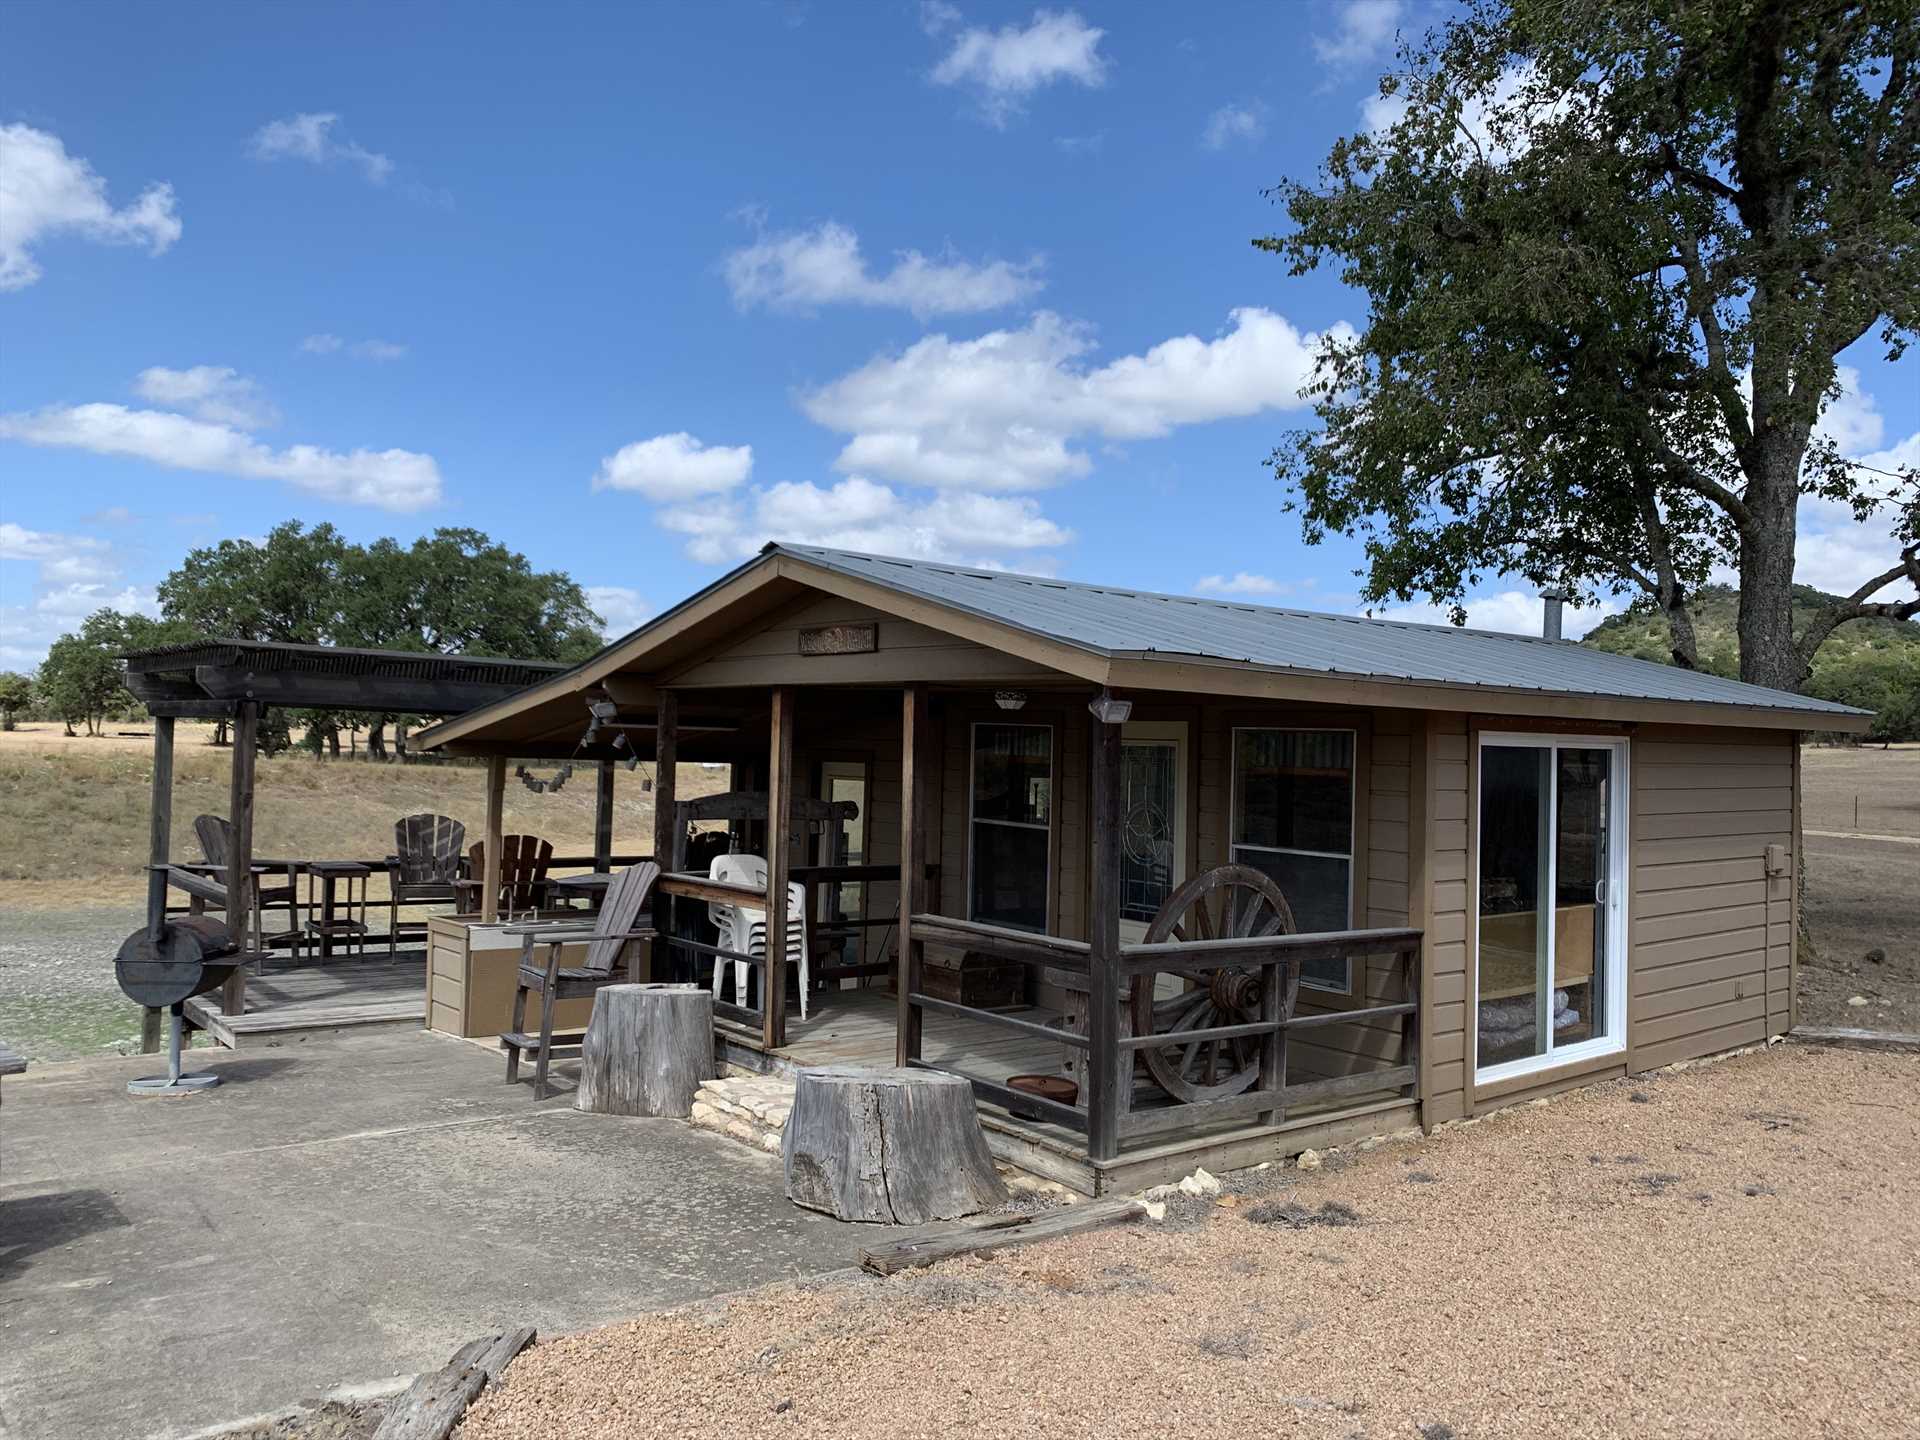                                                 Feeling social? The shared pavilion space is shared with the other cabins at the ranch, and it provides a great space to mingle with your fellow travelers!